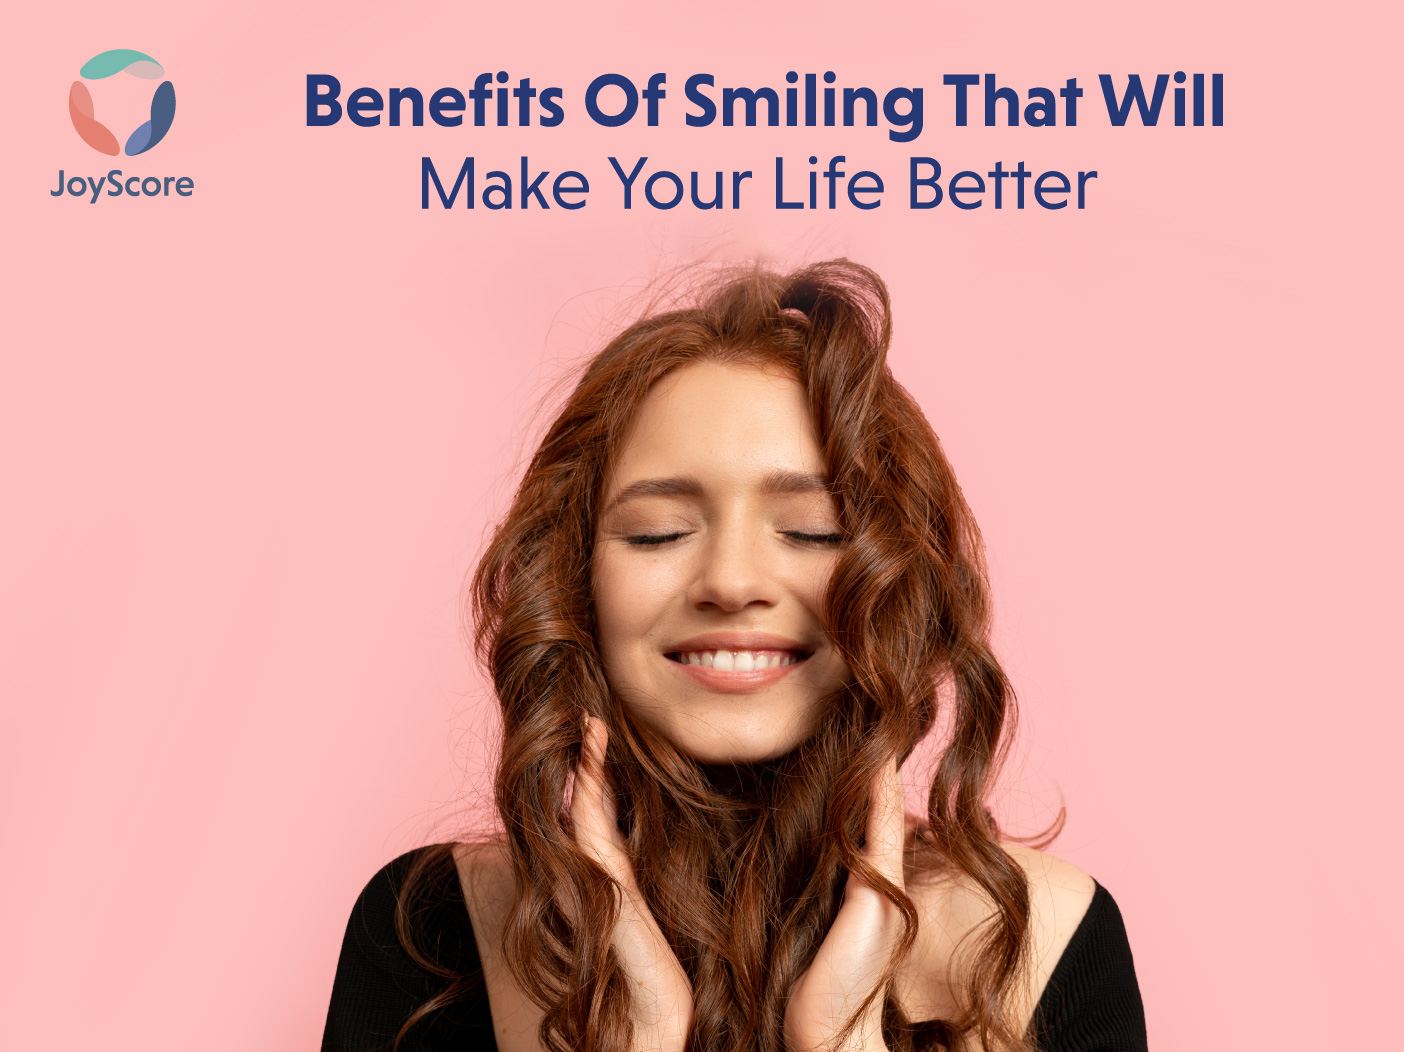 The Top Benefits Of Smiling Even When You Don’t Feel Like It